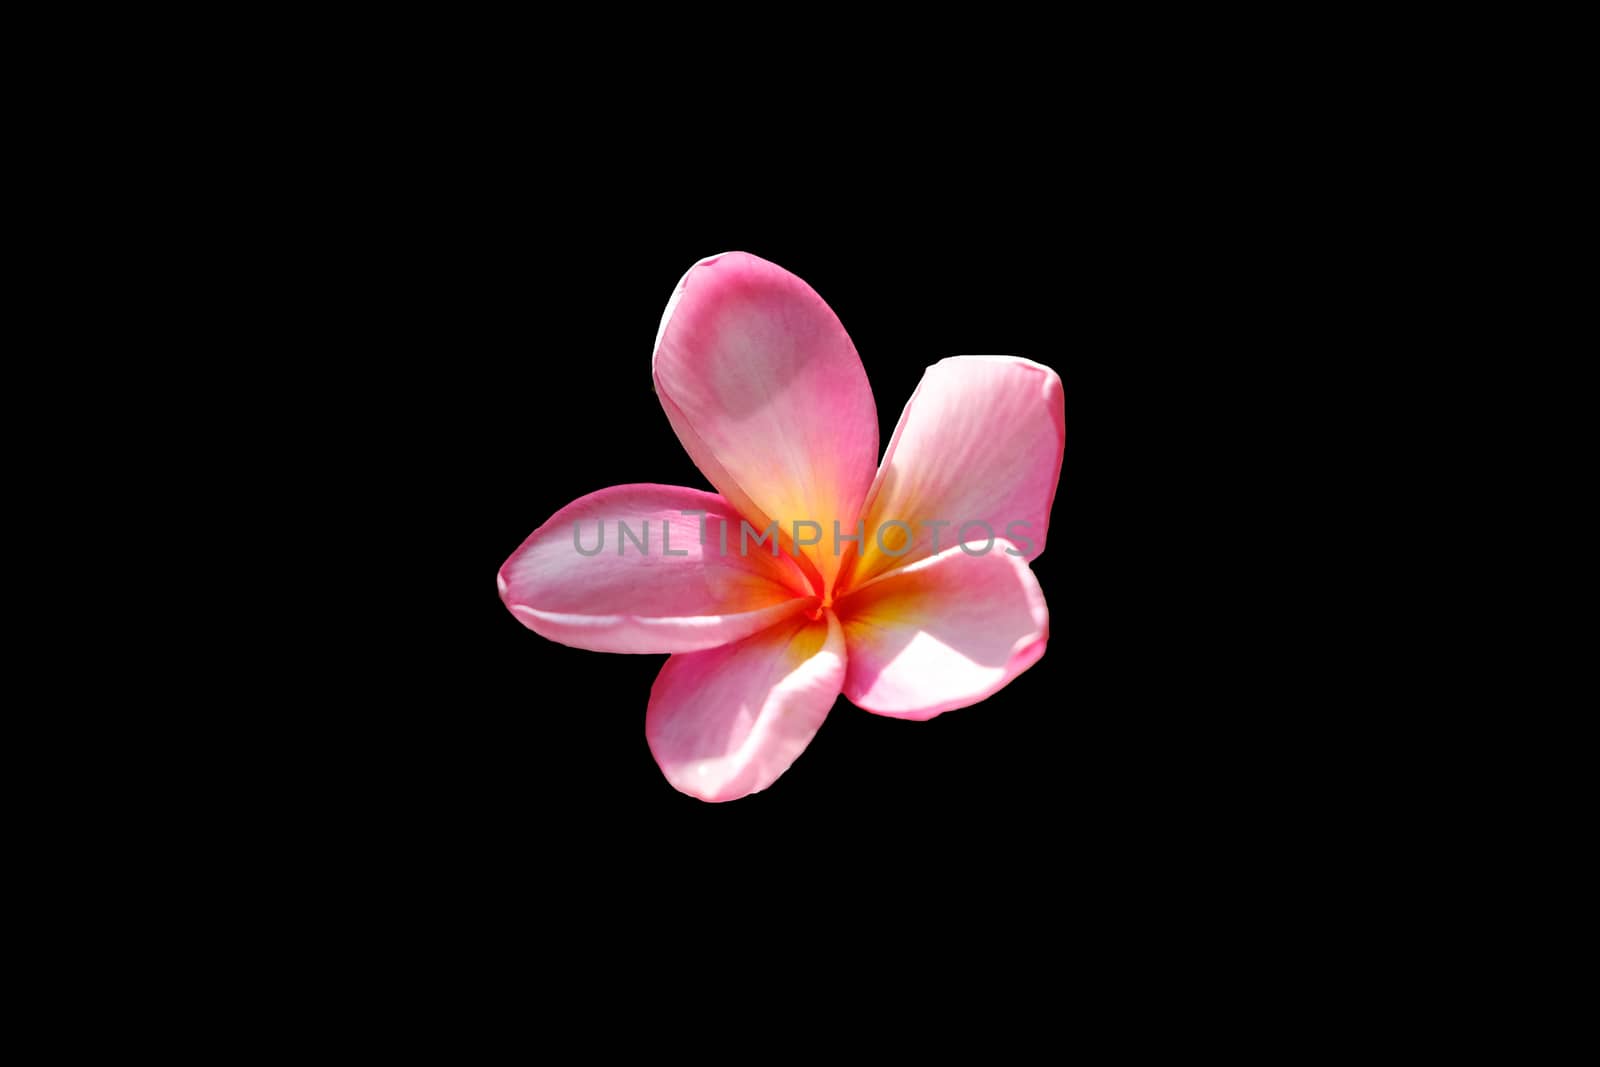 Cluseup head shot of pink frangipani flower isolated on black background by Macrostud